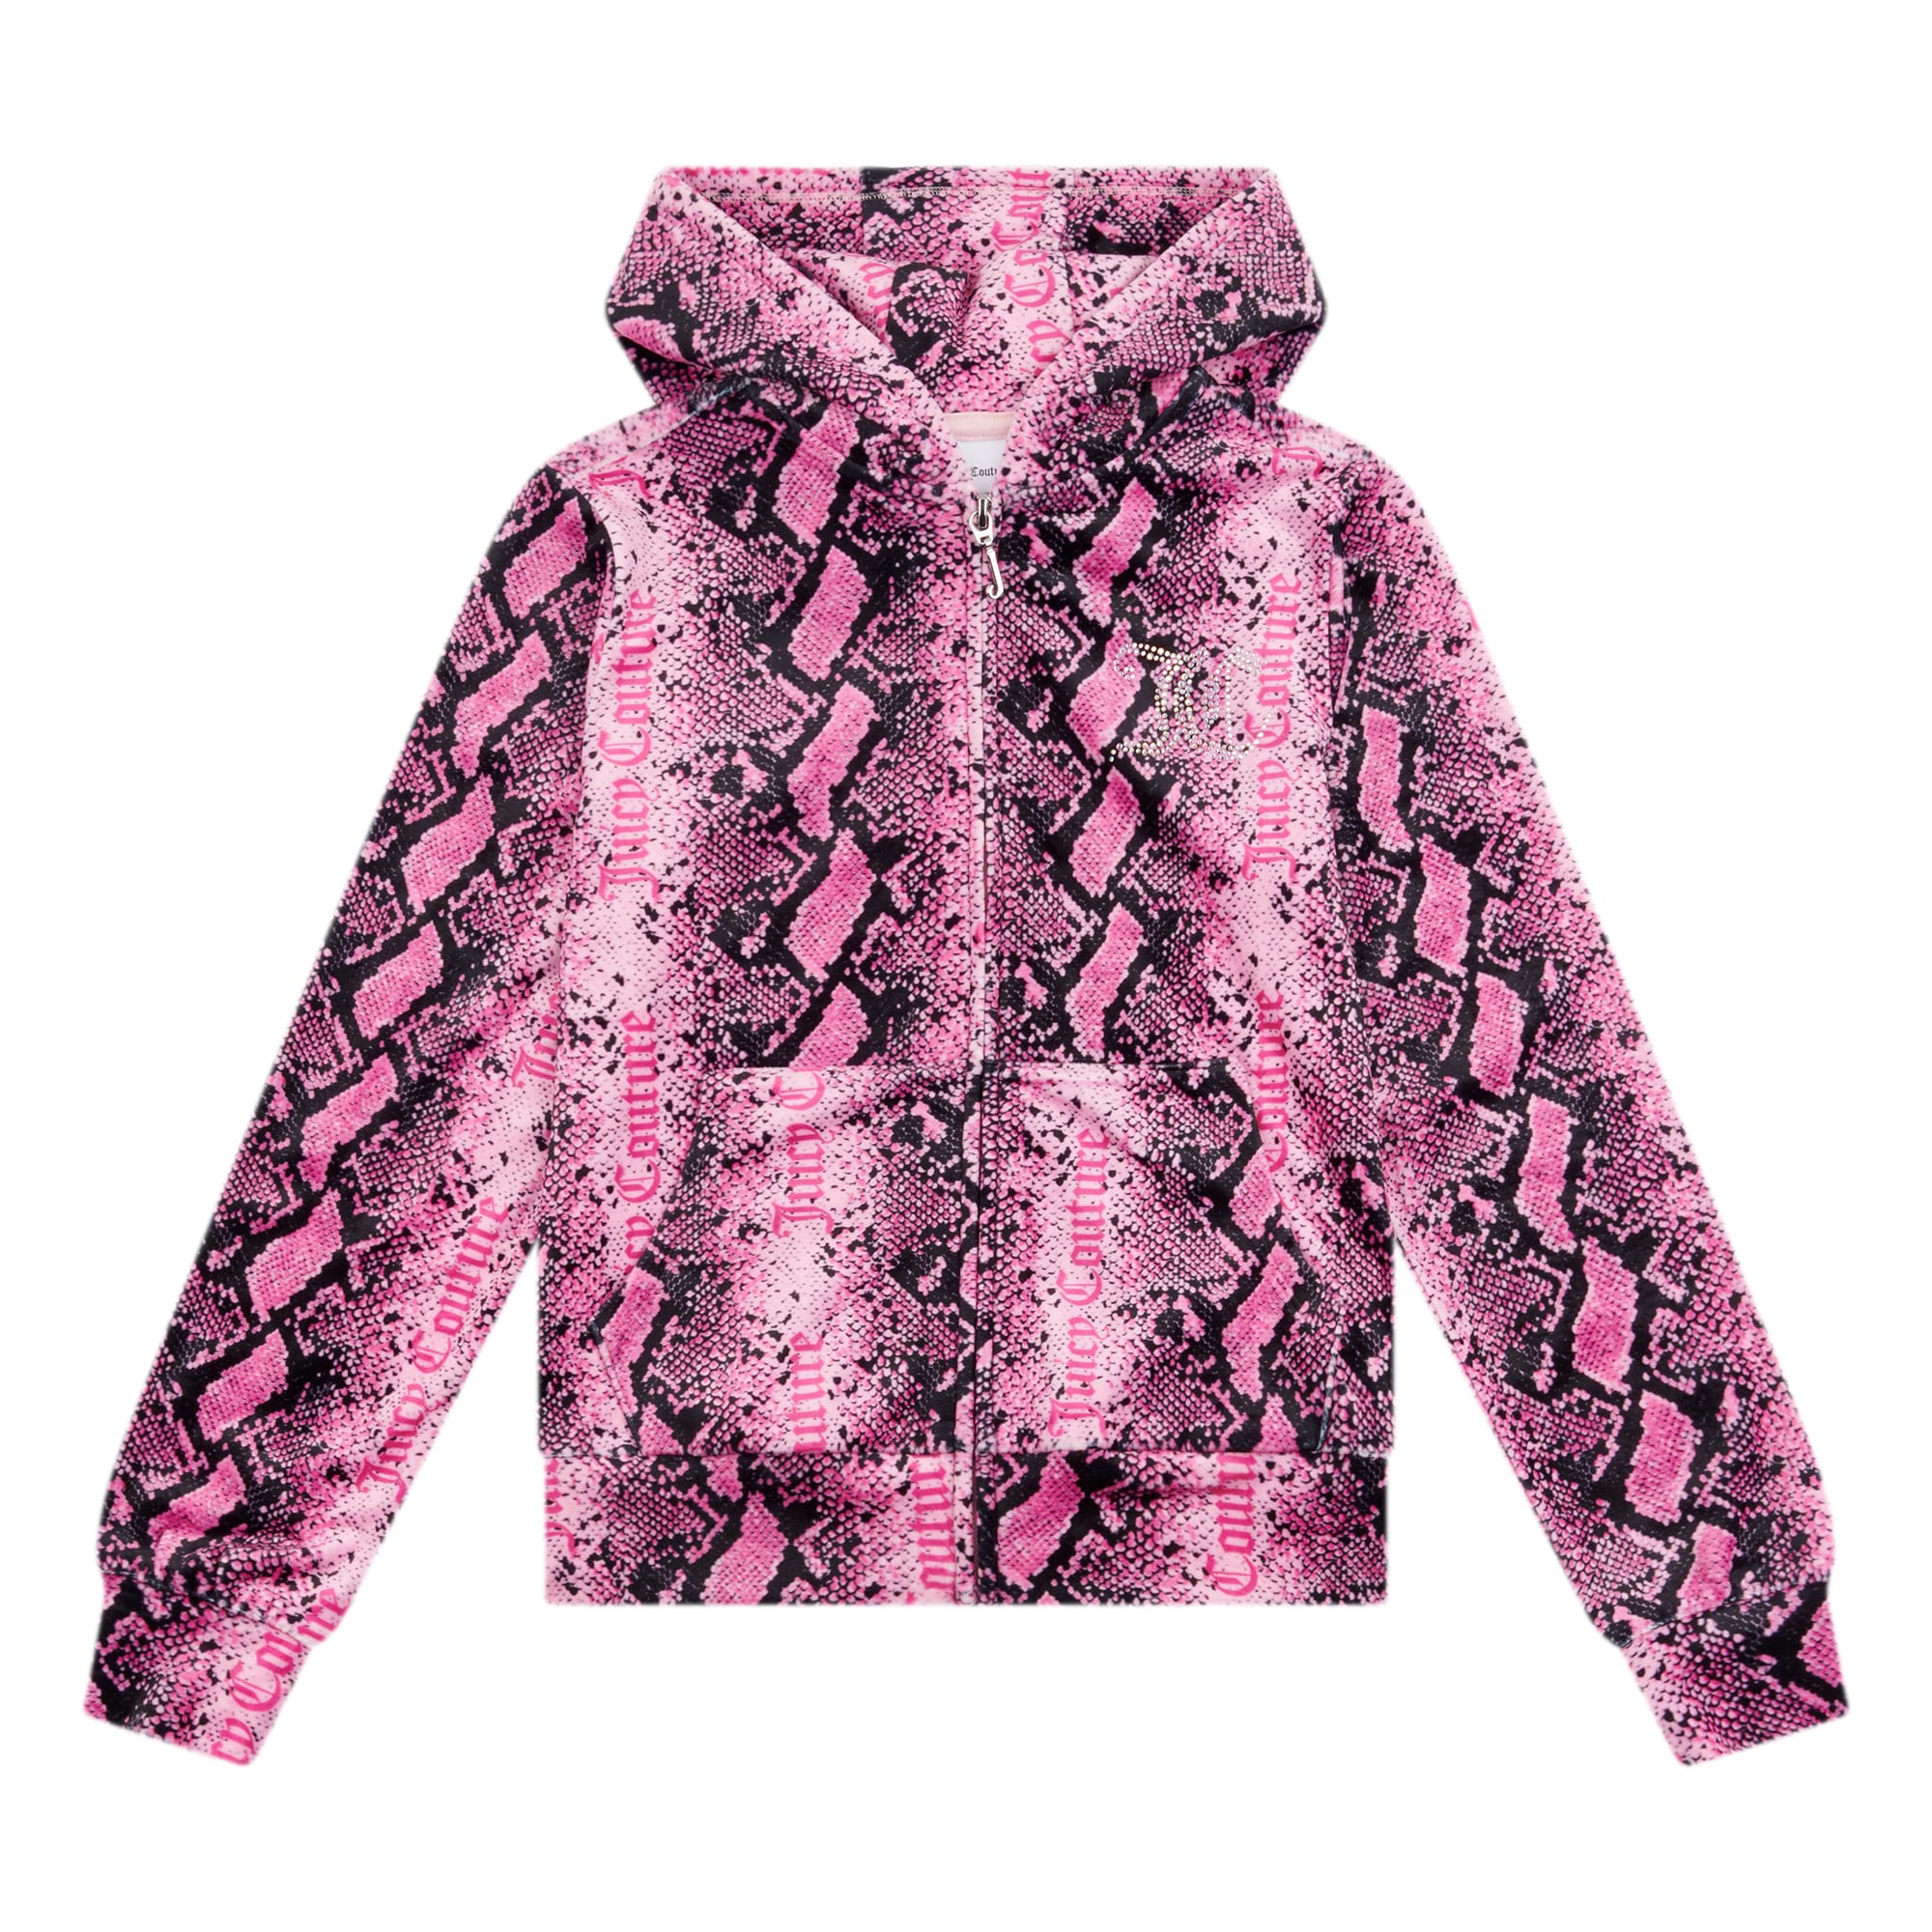 Juicy couture girls pink snakeskin hoodie front view